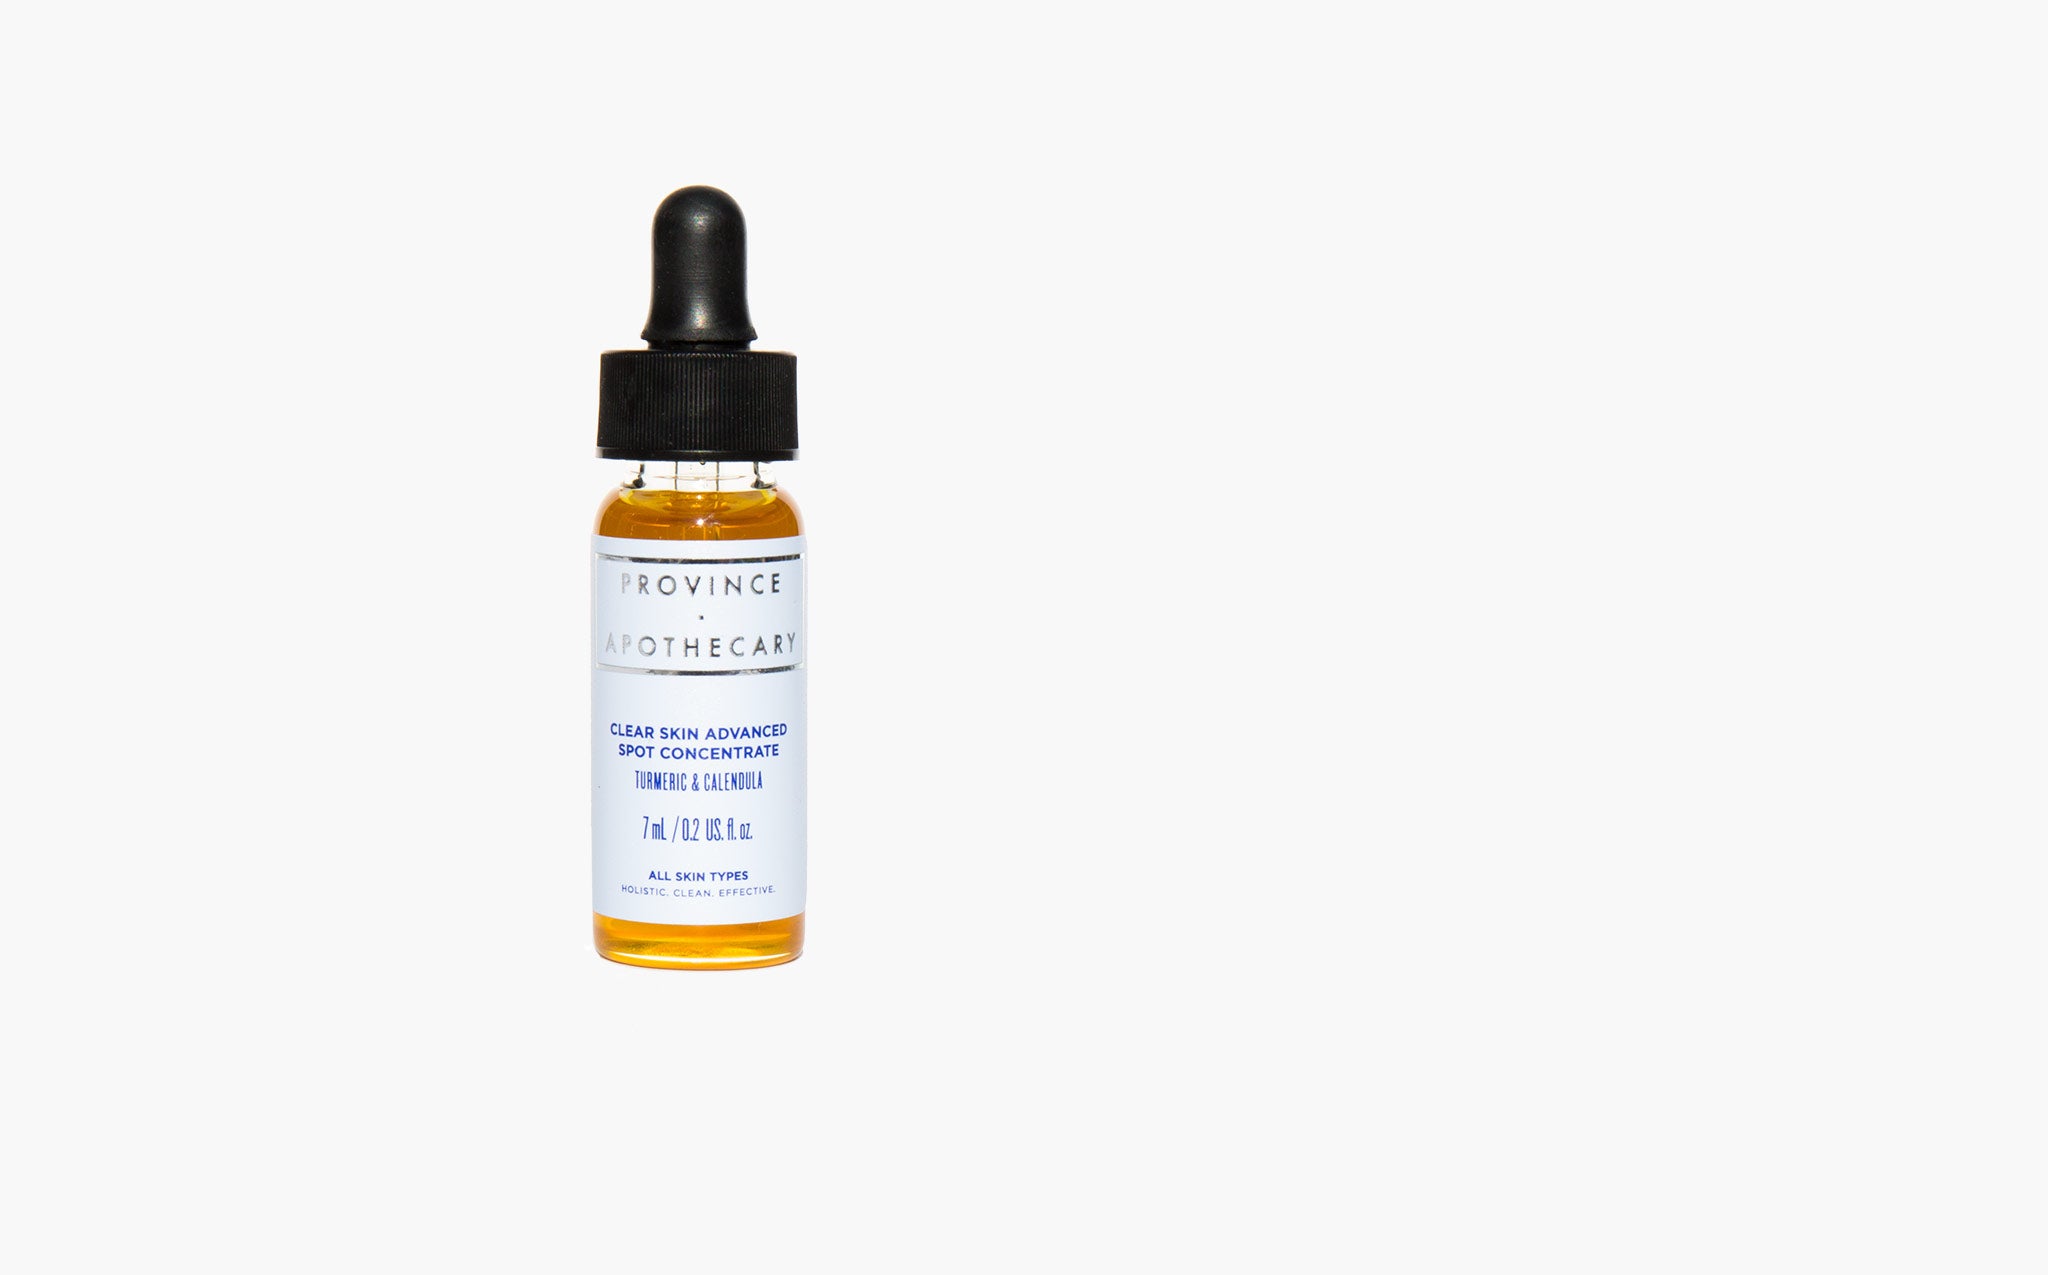 Province Apothecary Clear Skin Advanced Spot Concentrate